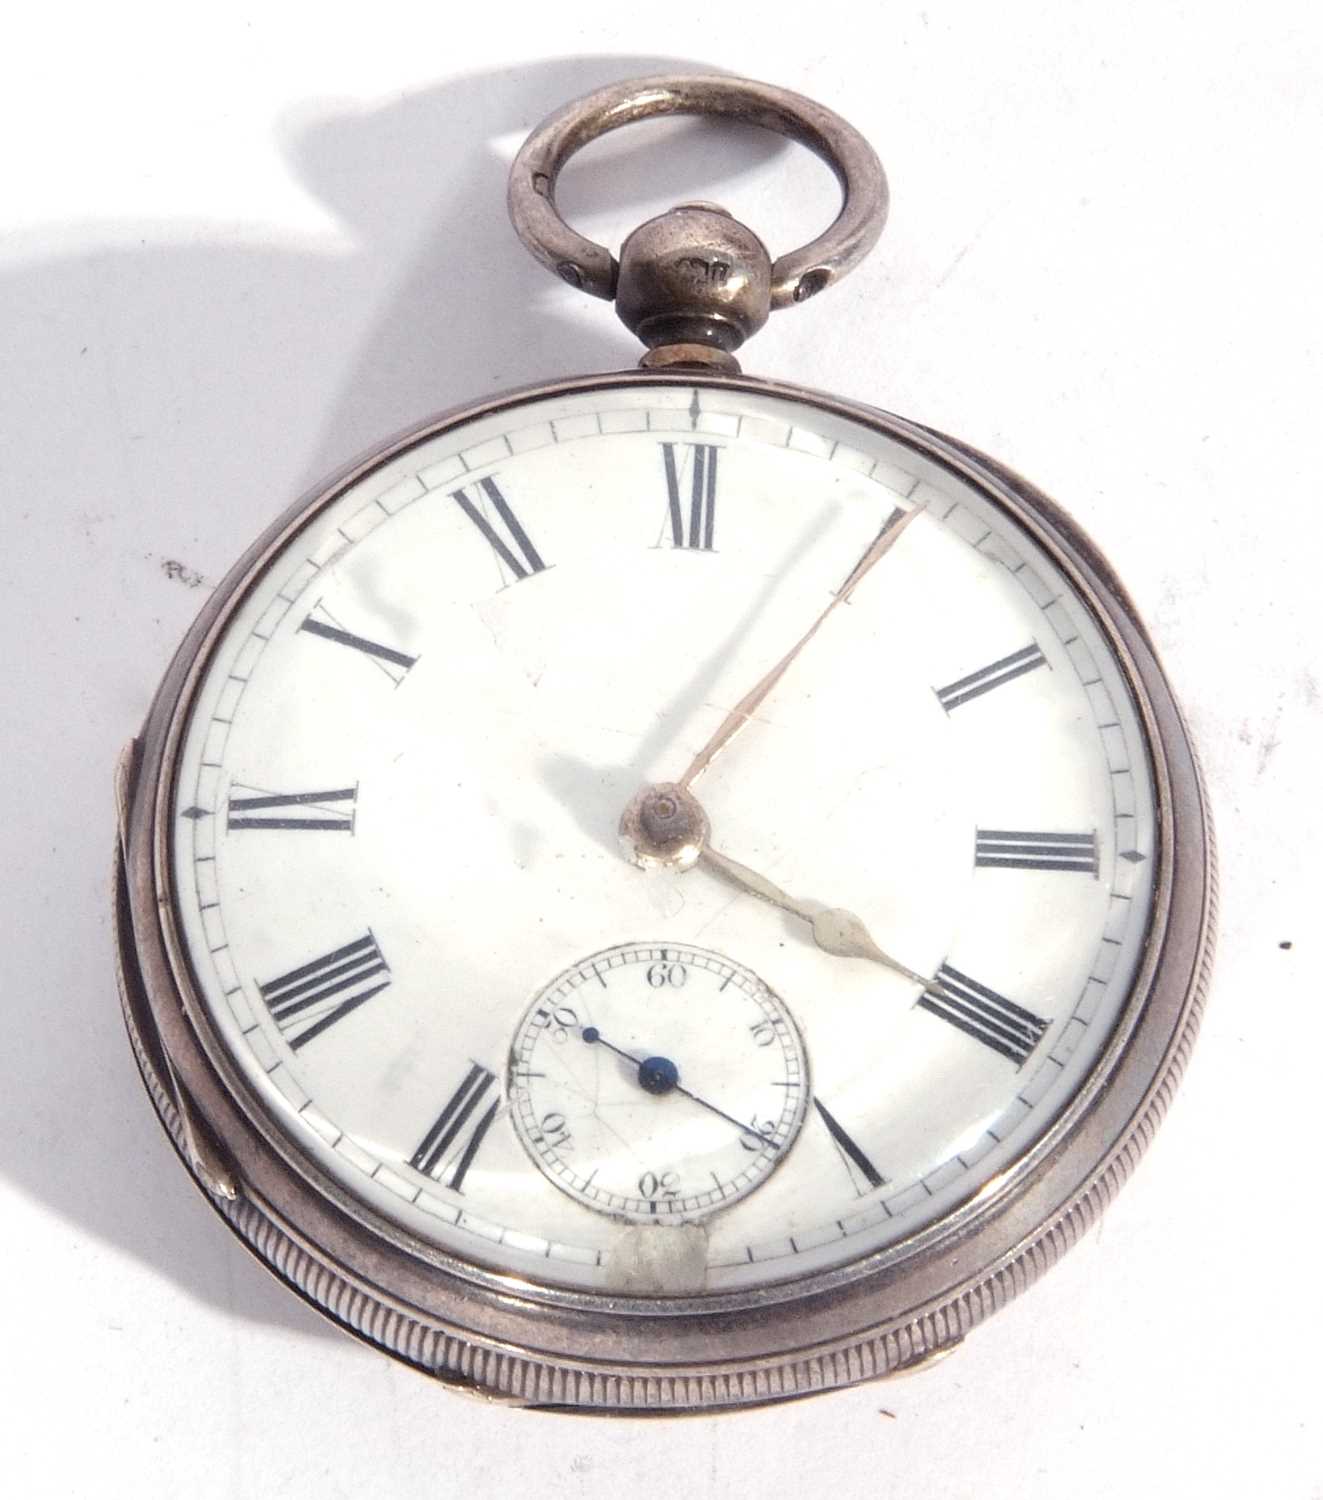 Silver pocket watch with white enamel dial, featuring a sub-second dial and Roman numeral hour